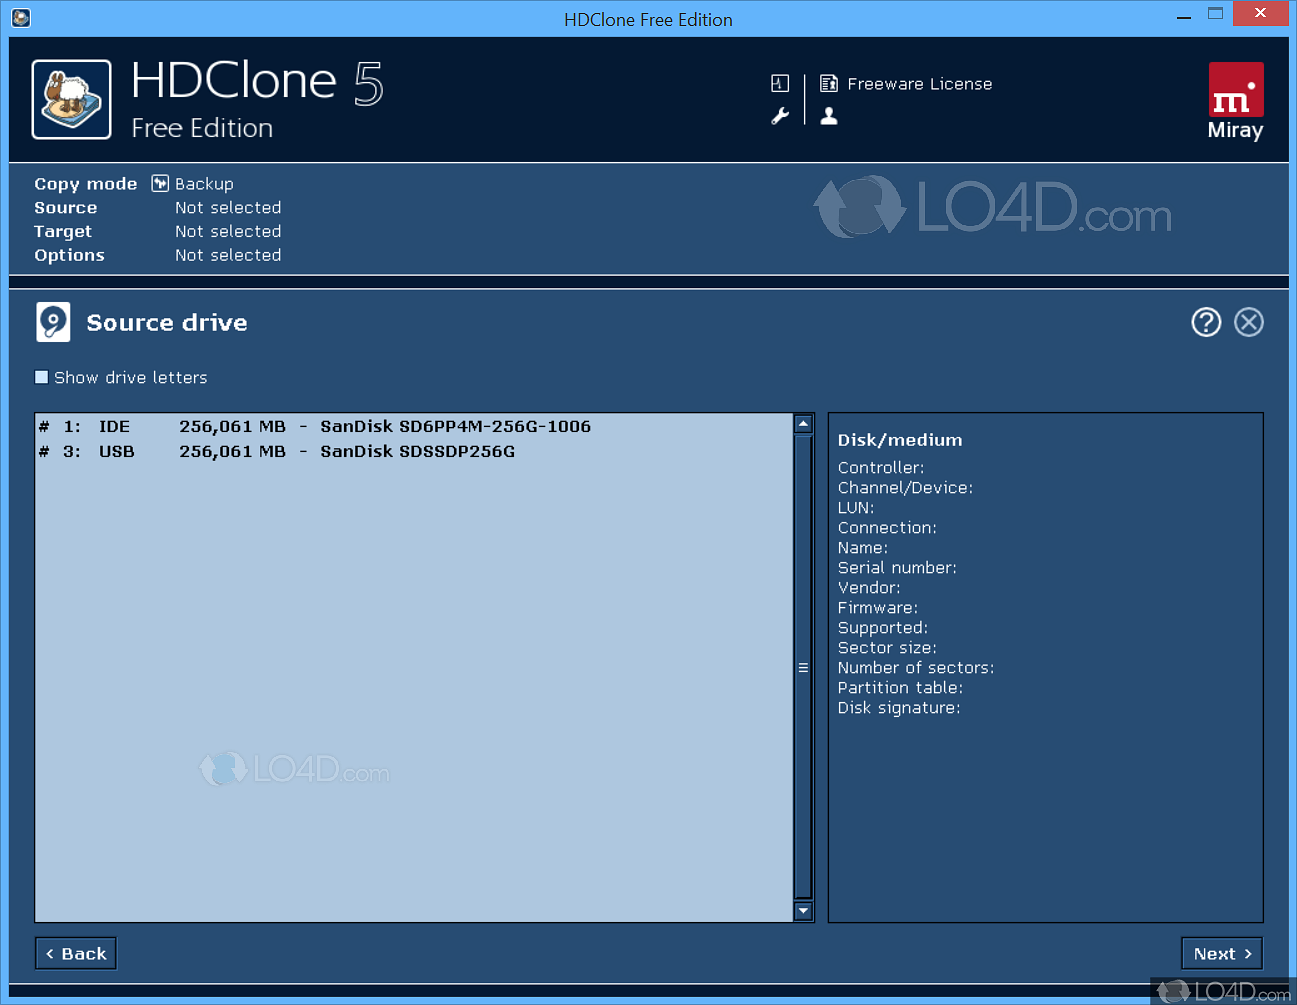 hdclone 4 professional edition free download